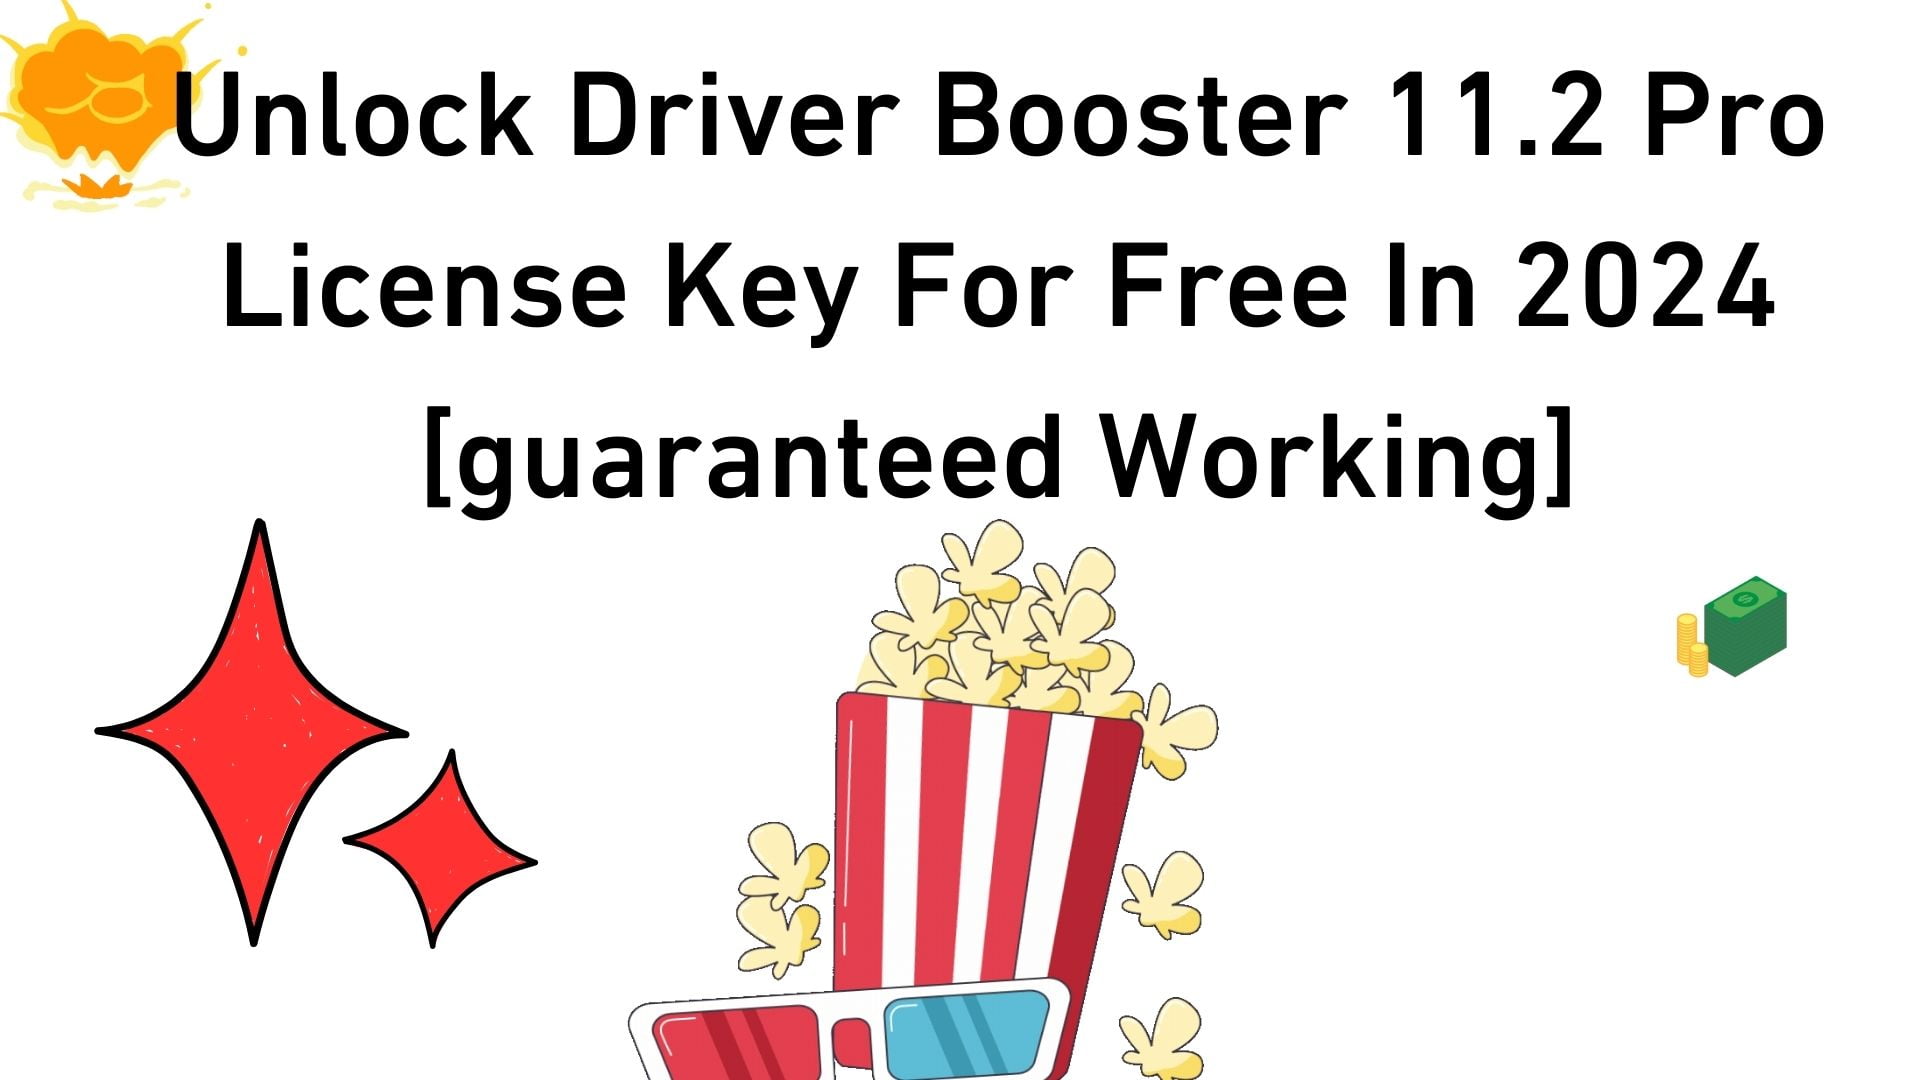 Unlock Driver Booster 11.2 Pro License Key For Free In 2024 [Guaranteed Working]